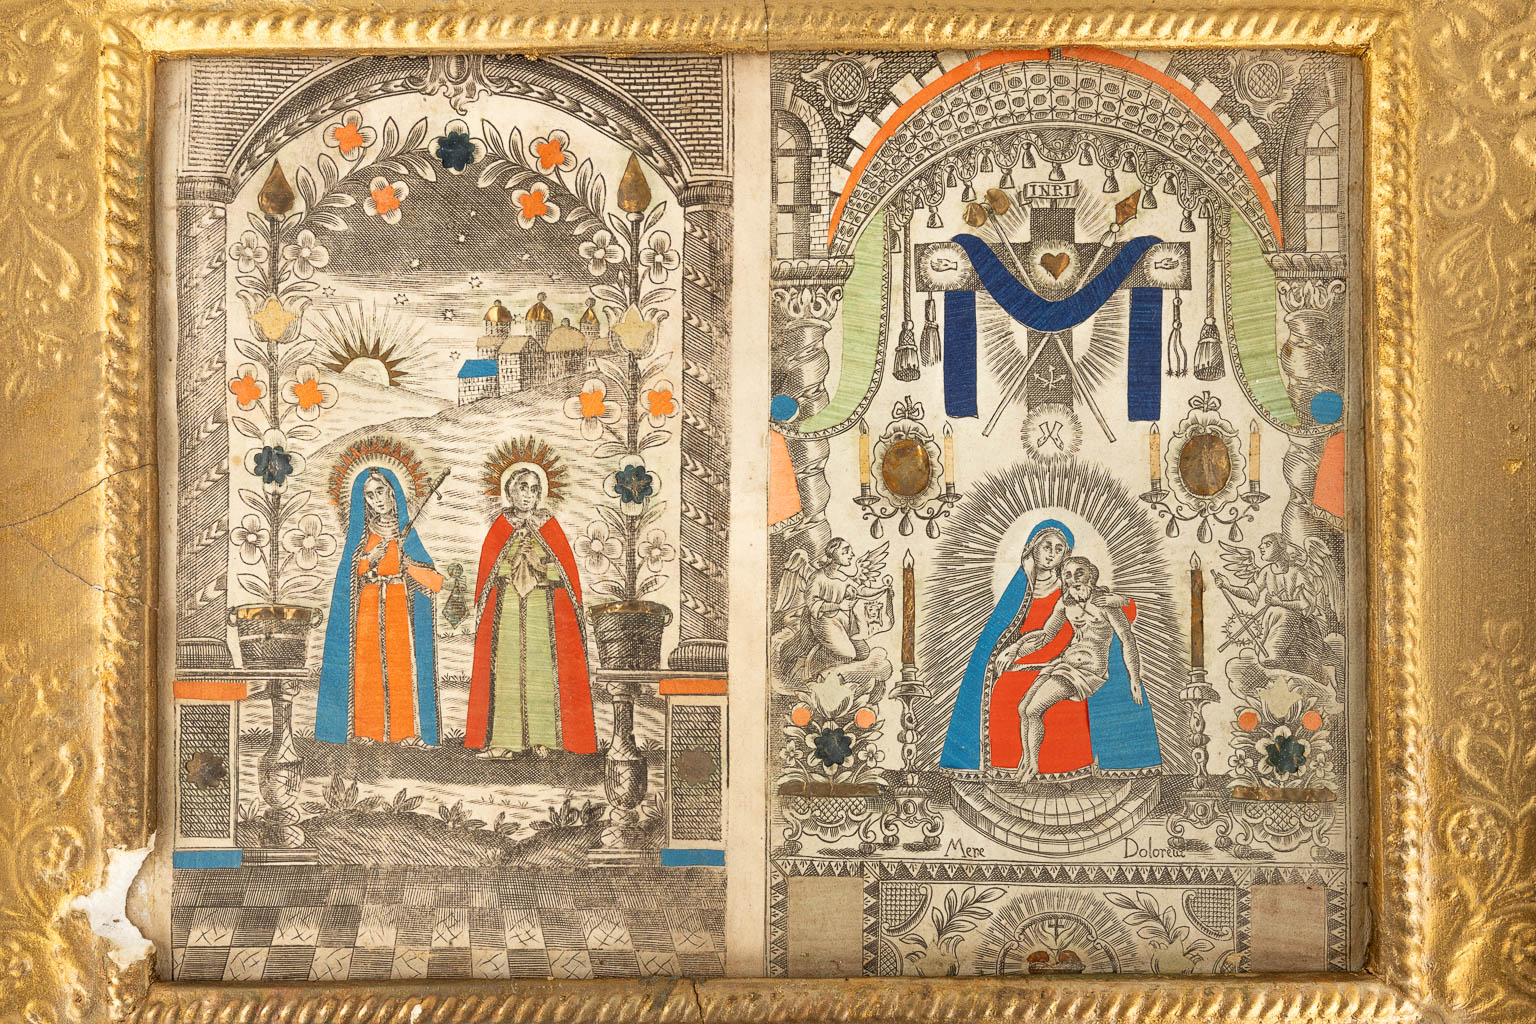 A collection of 3 religious frames, with Angus Dei, santjes. (W: 45 x H: 38 cm)